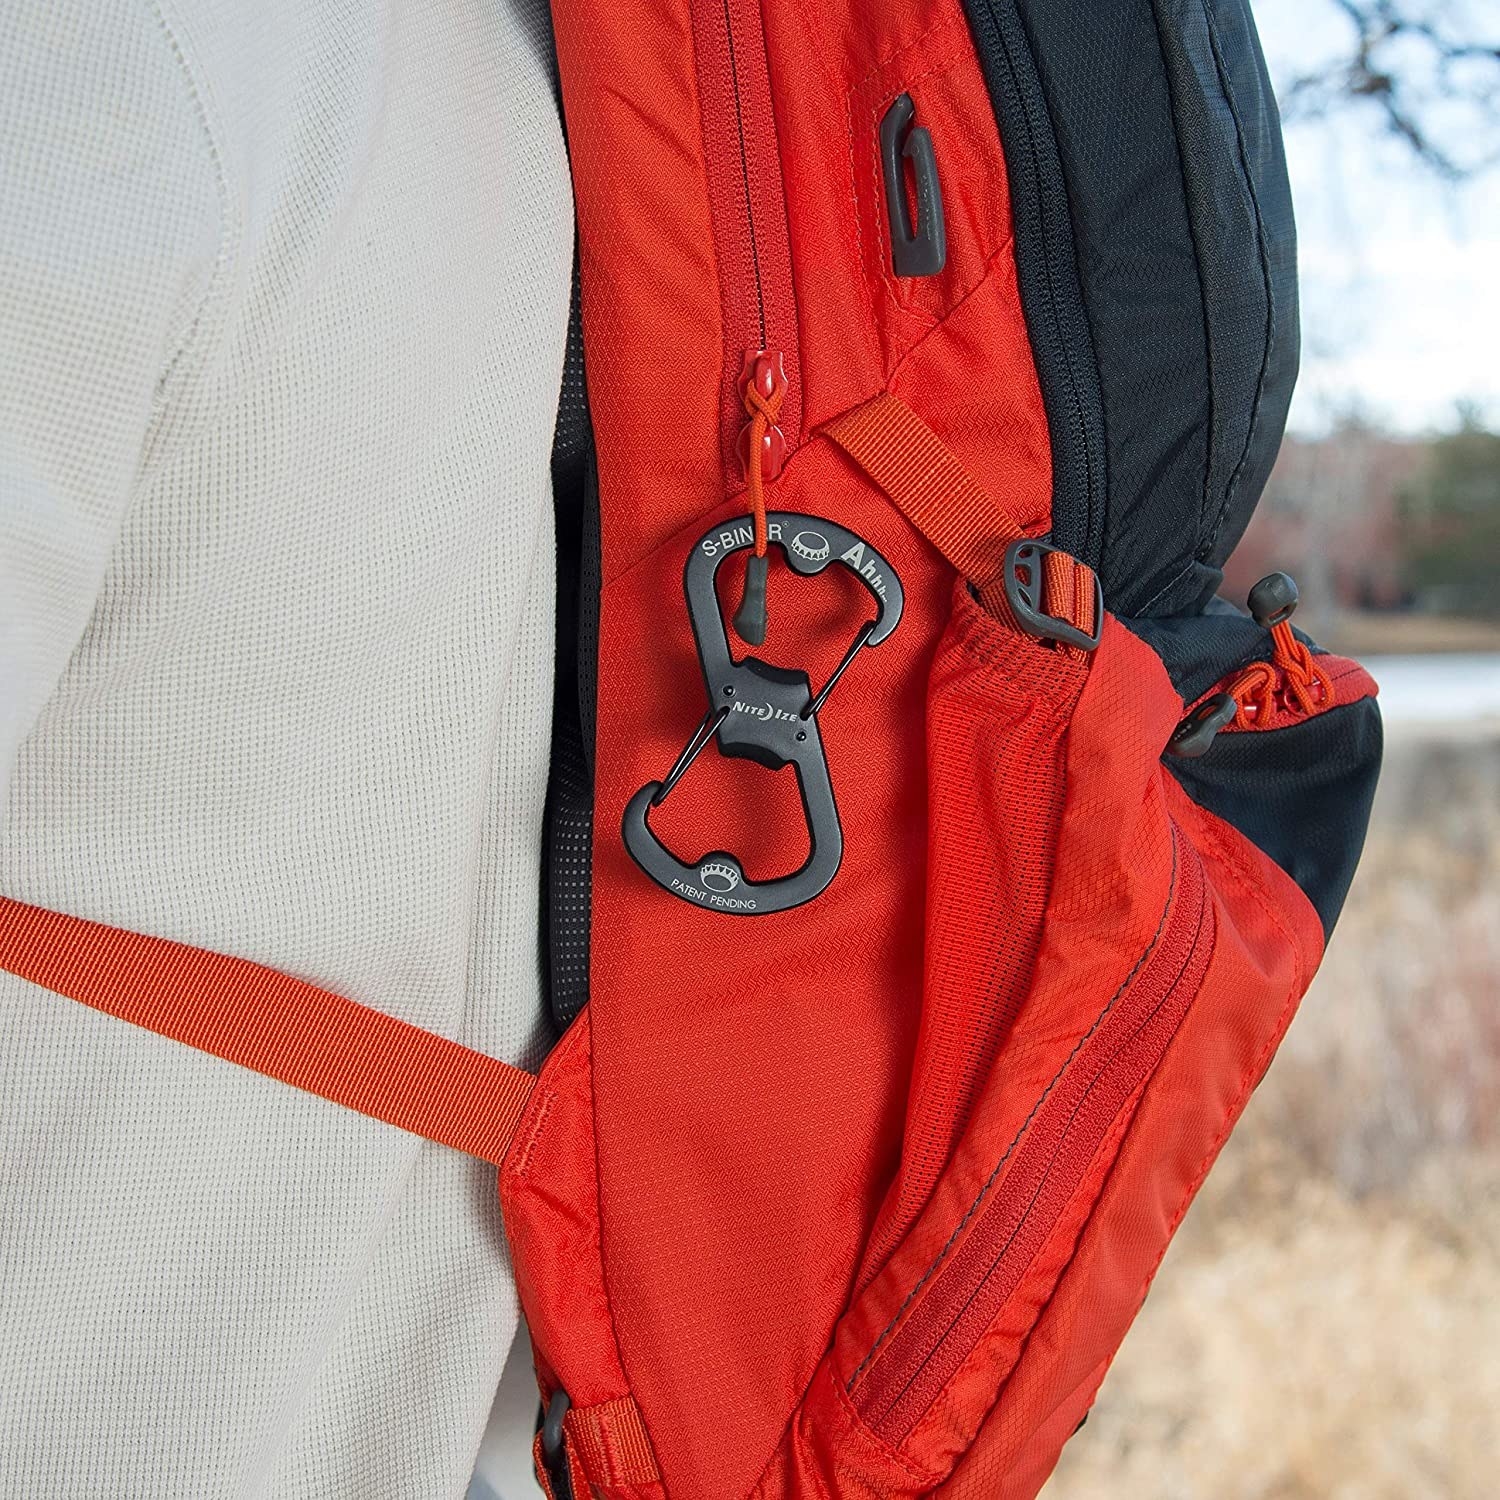 The carabiner attached to a backpack